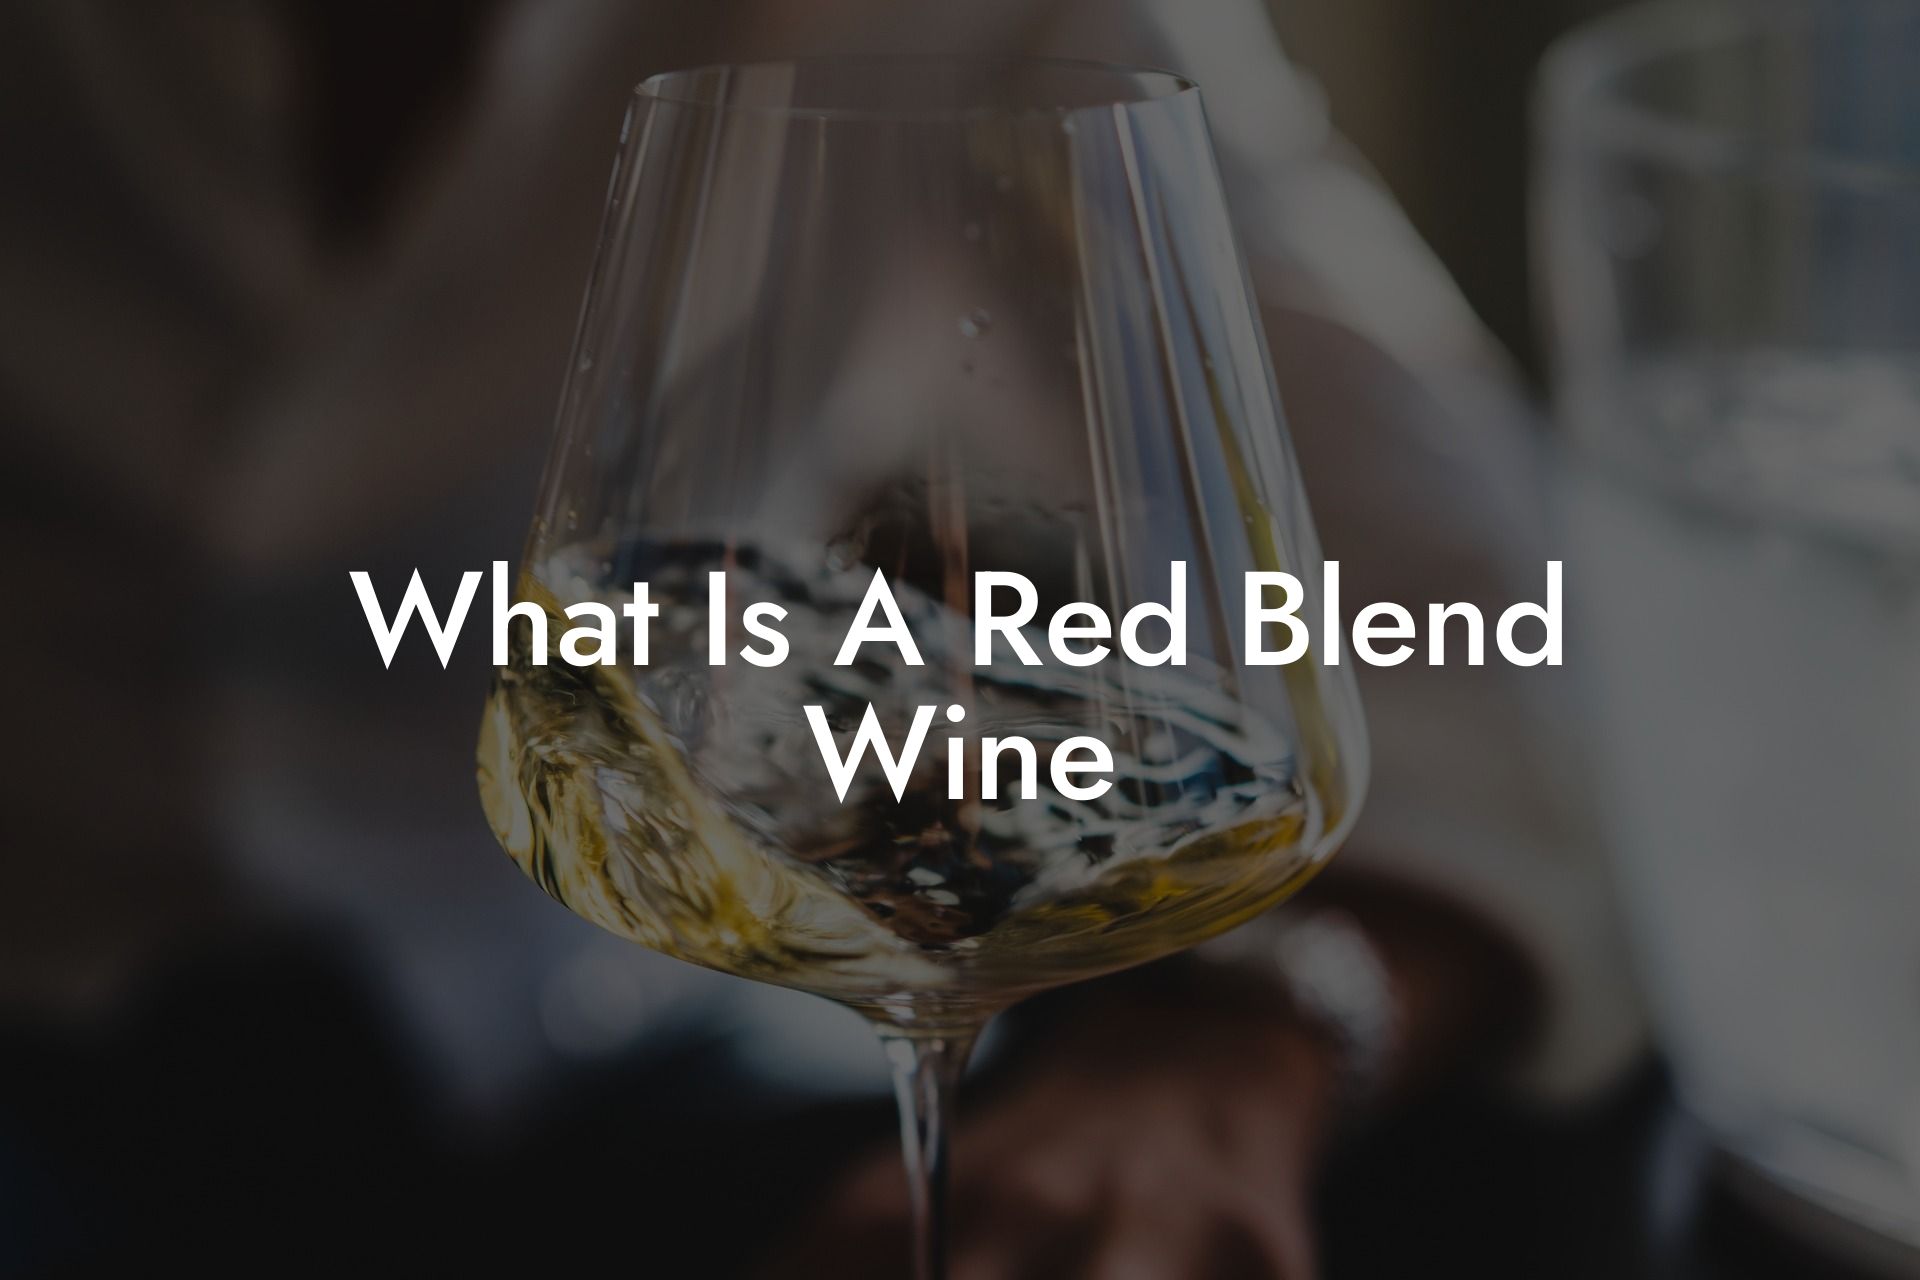 What Is A Red Blend Wine